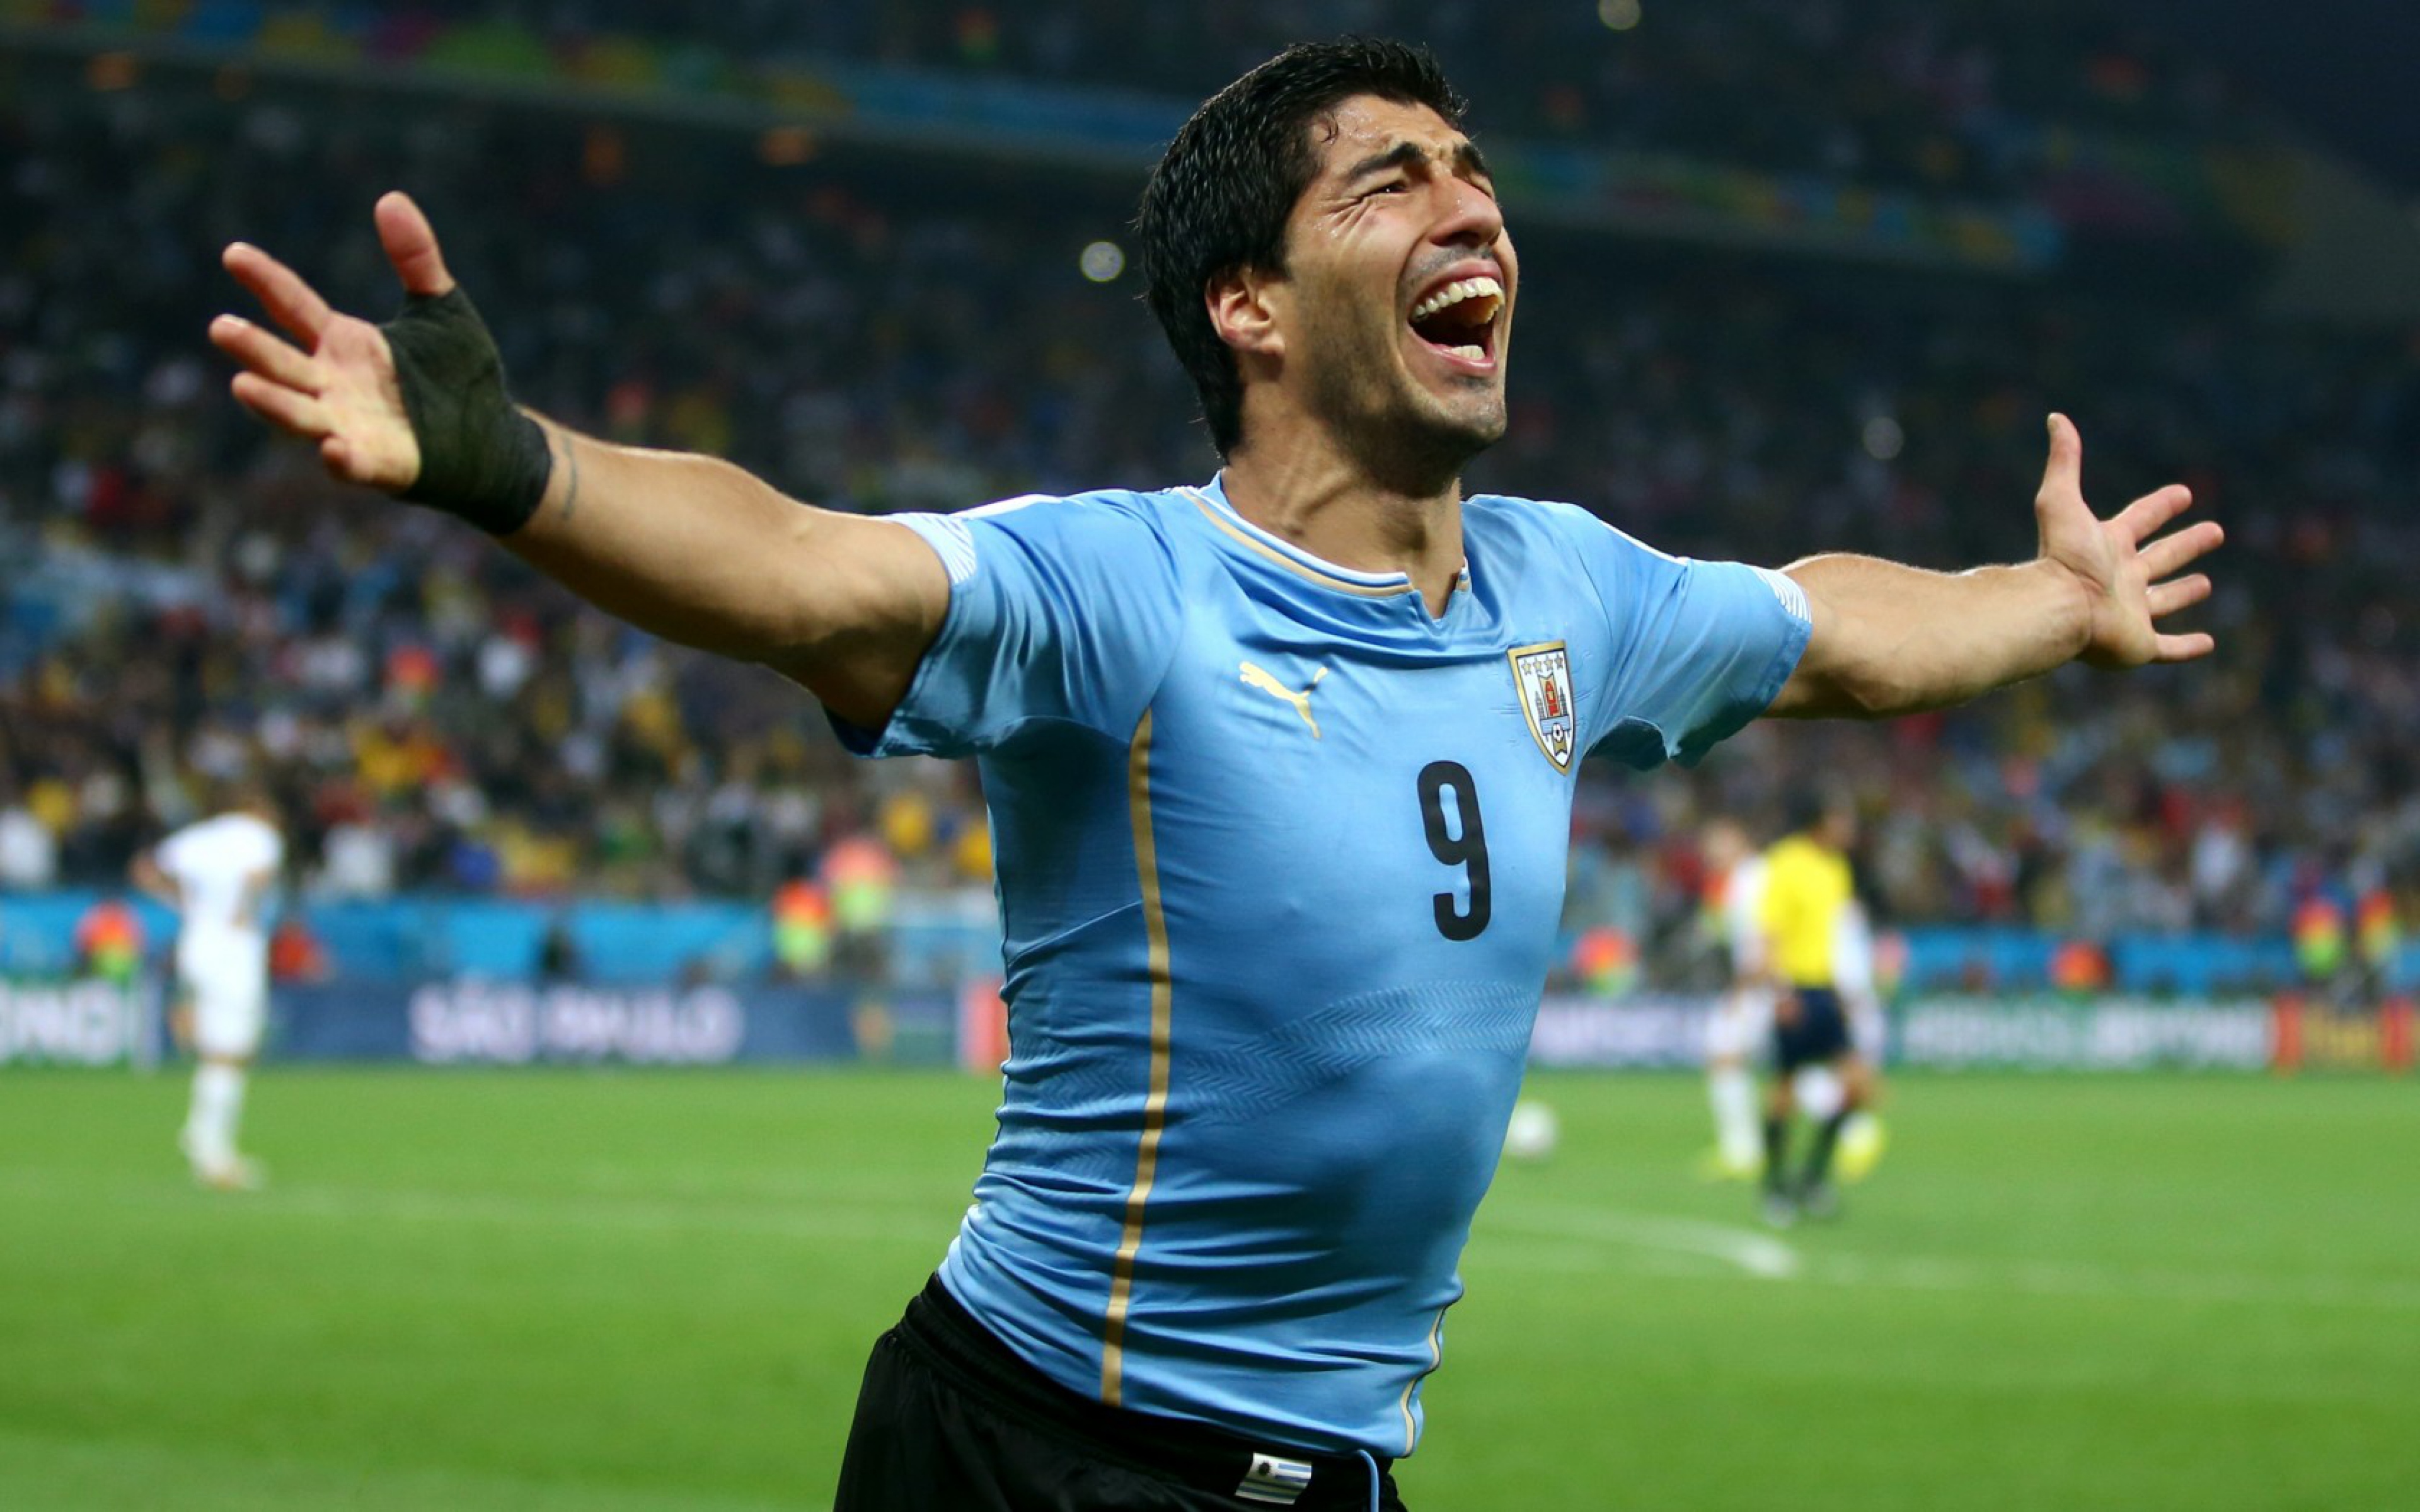 Free Luis Suarez Moments Football Soccer Player Hd Goals Background Mobile Desktop Download Wallpapers